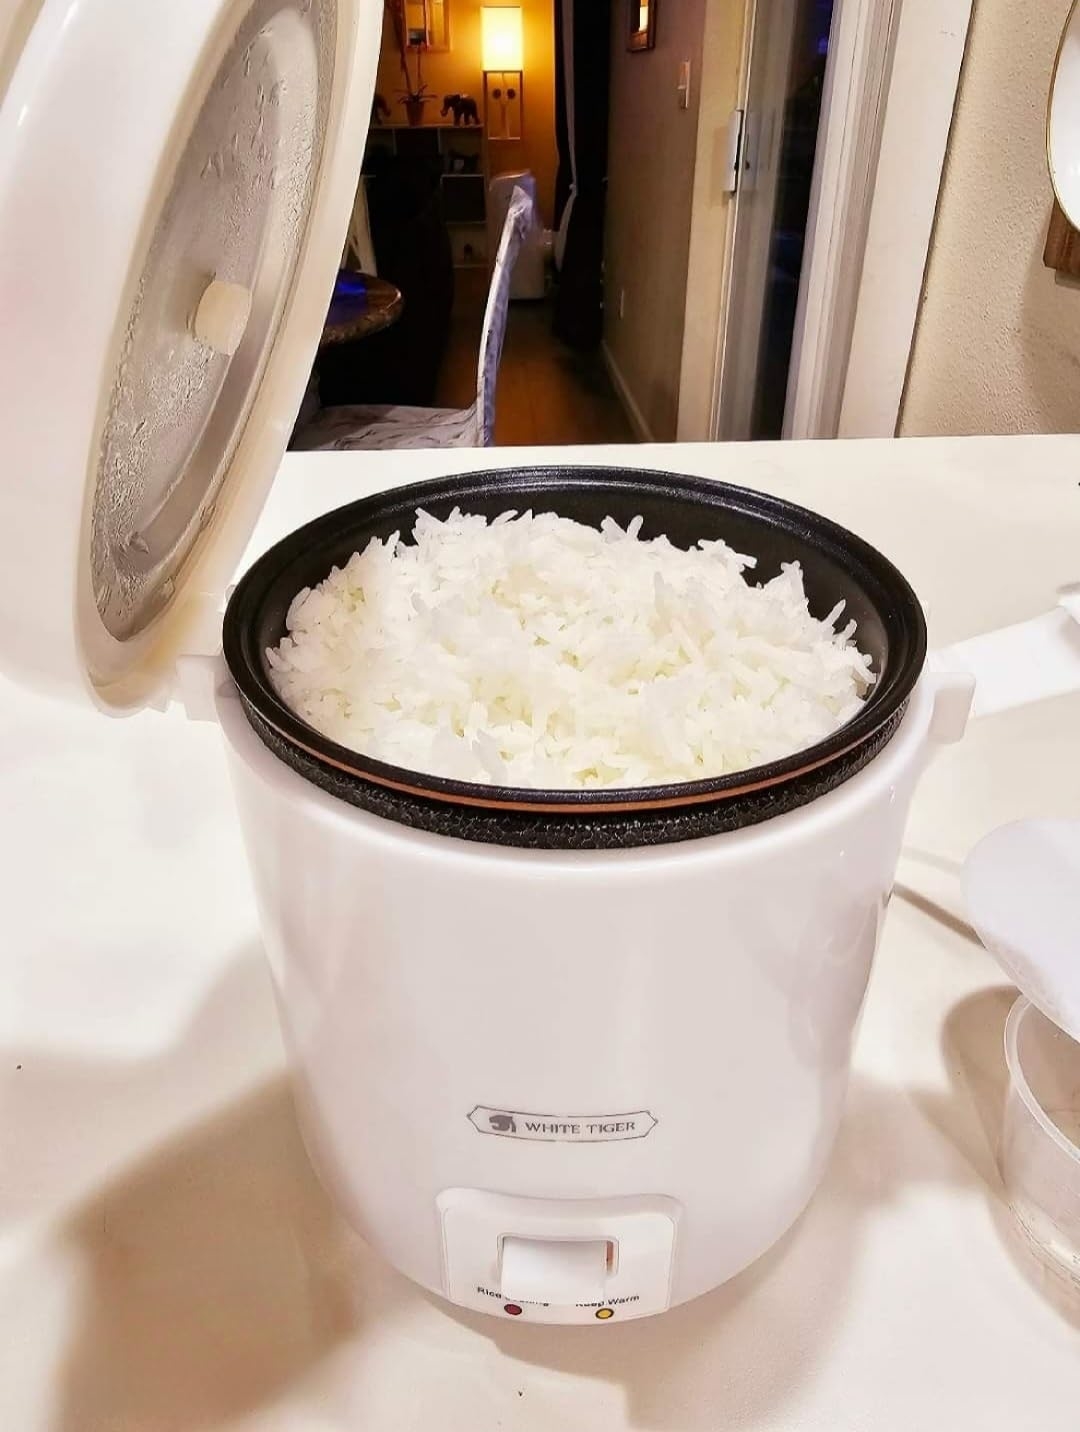 Reviewer image of the white rice cooker with cooked rice inside it